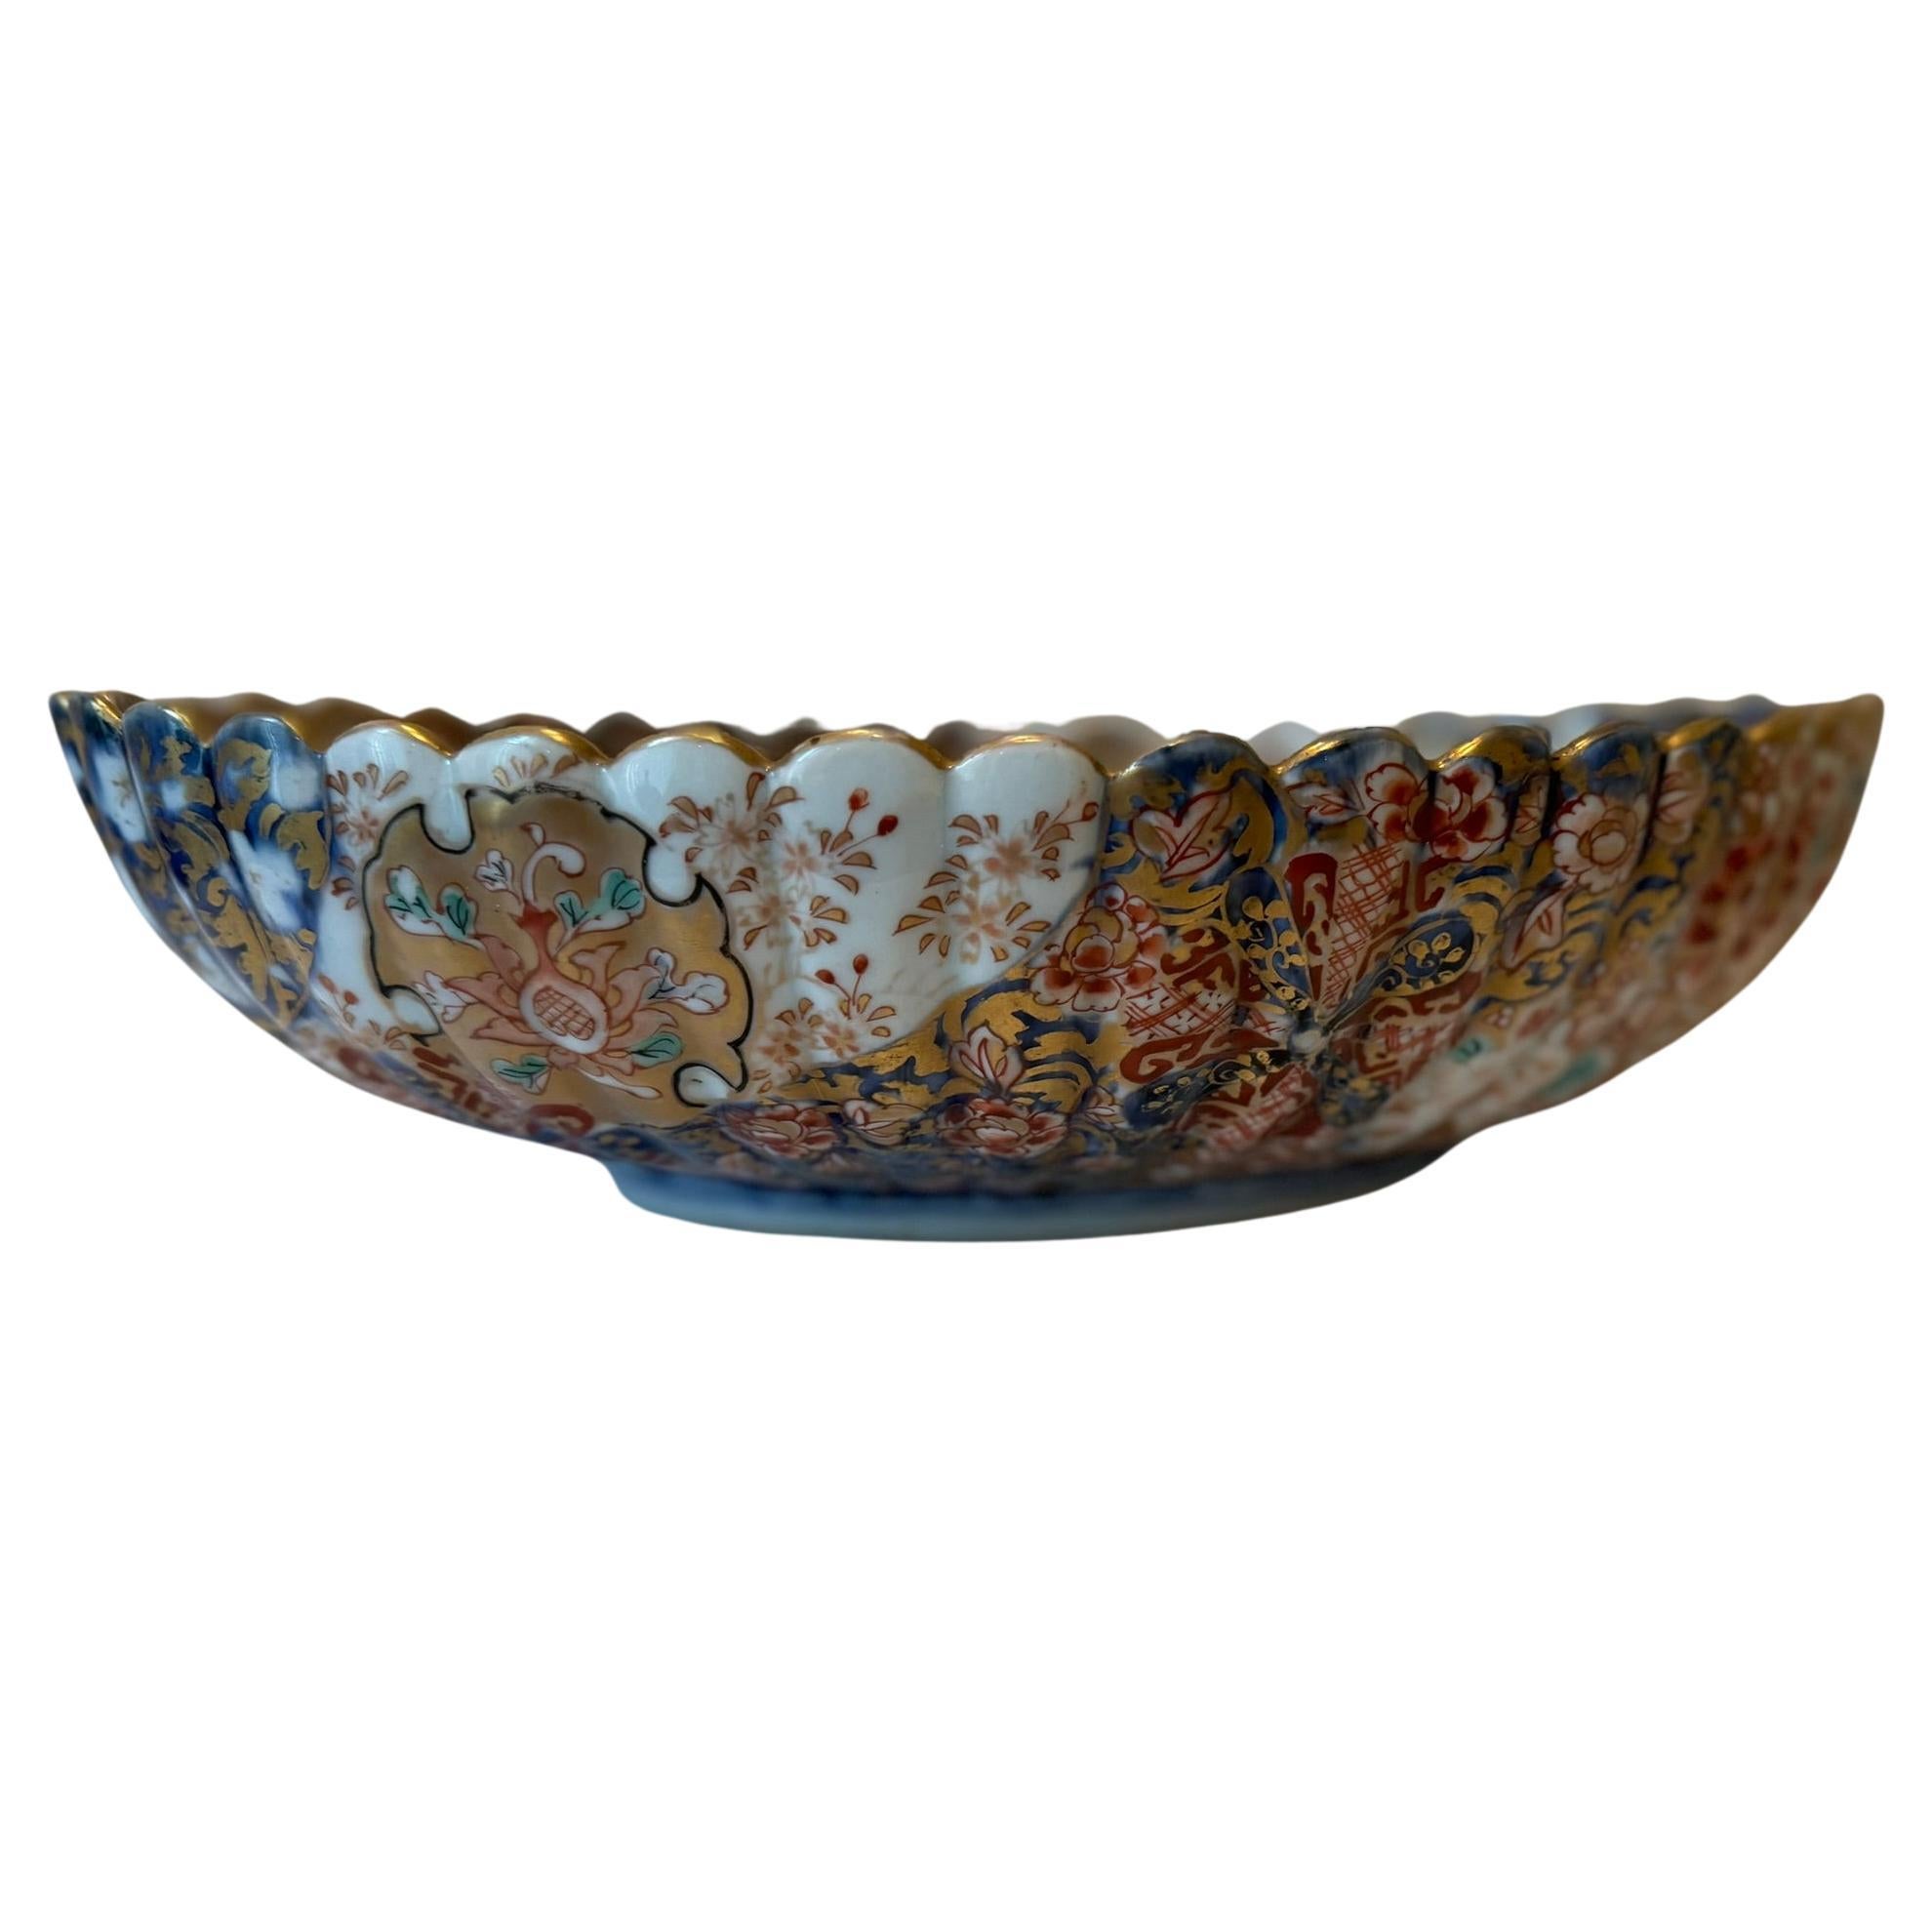 Japanese Early Meiji Period Porcelain Bowl, circa 1870 For Sale 4